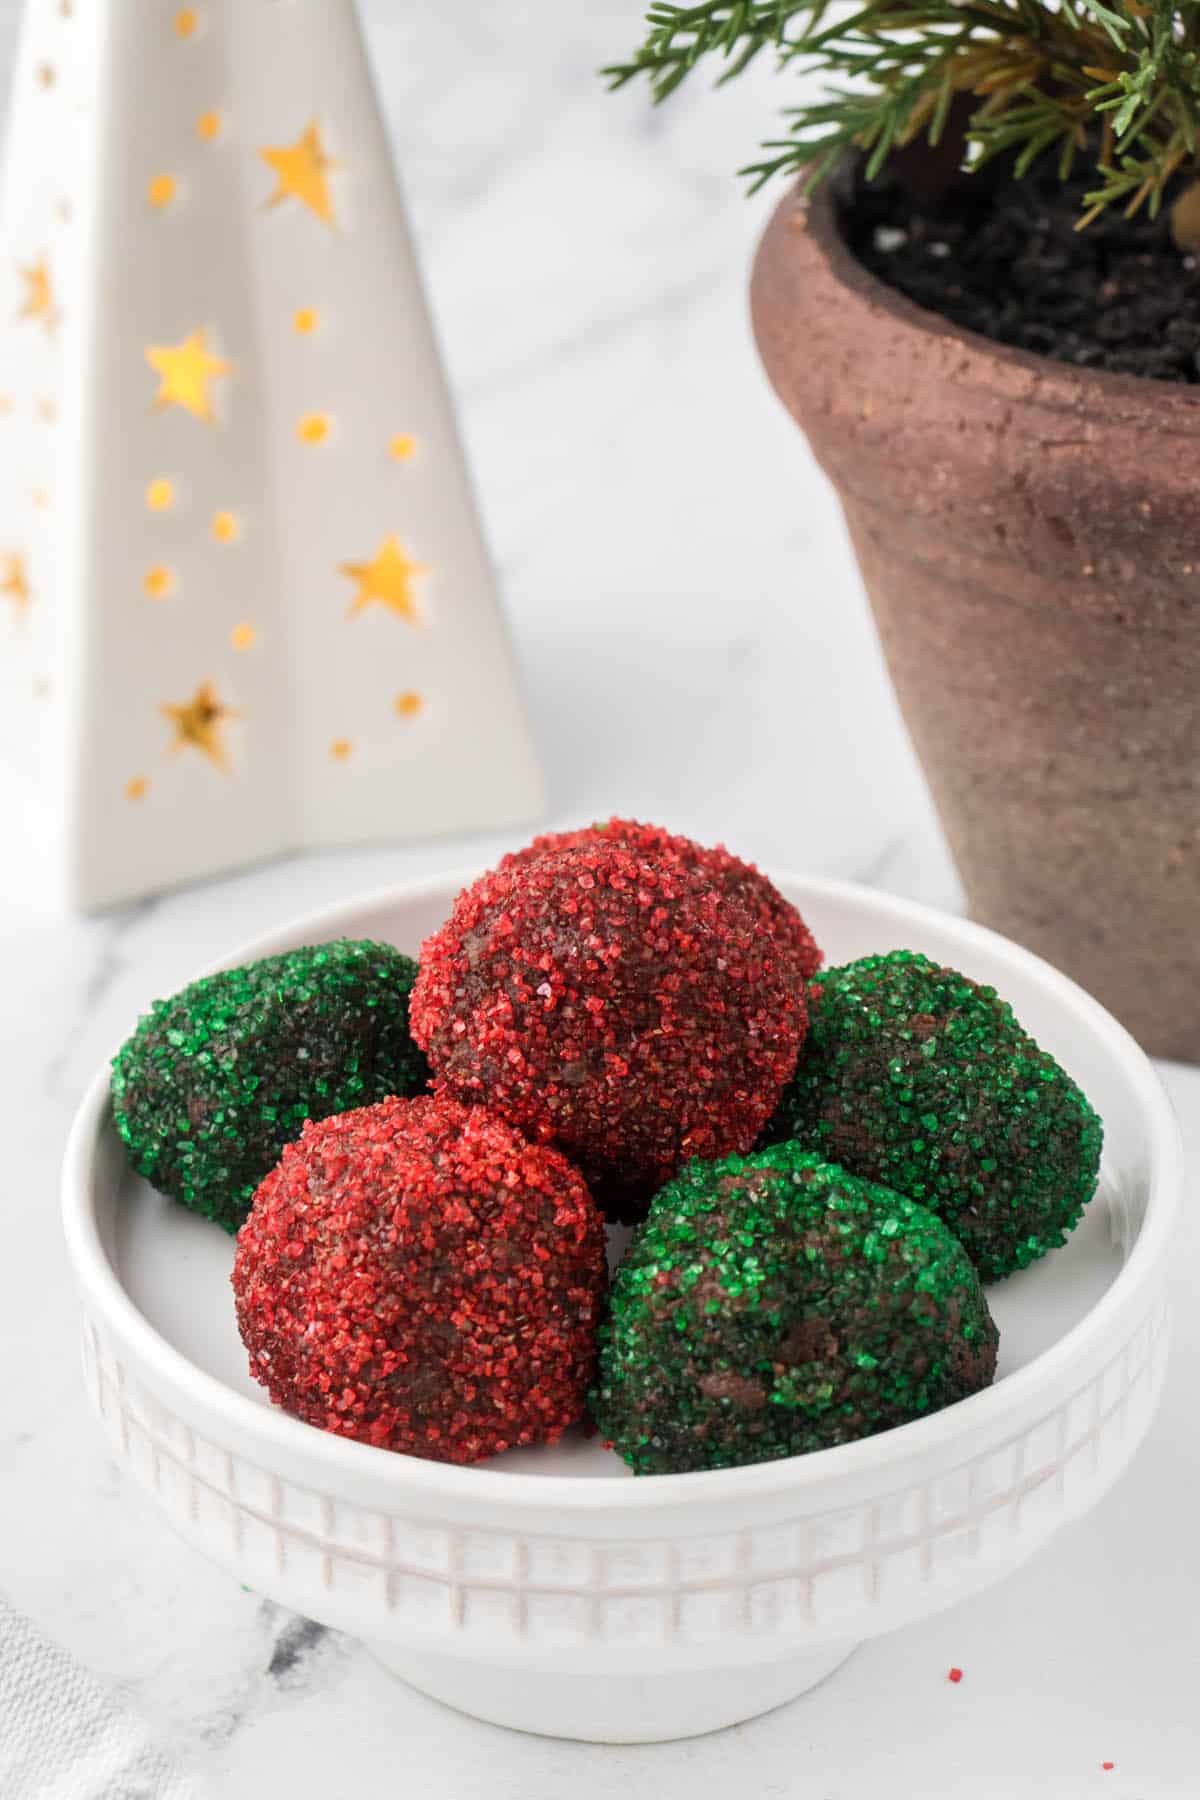 Kahlua Chocolate Truffles coated with red and green holiday sprinkles.